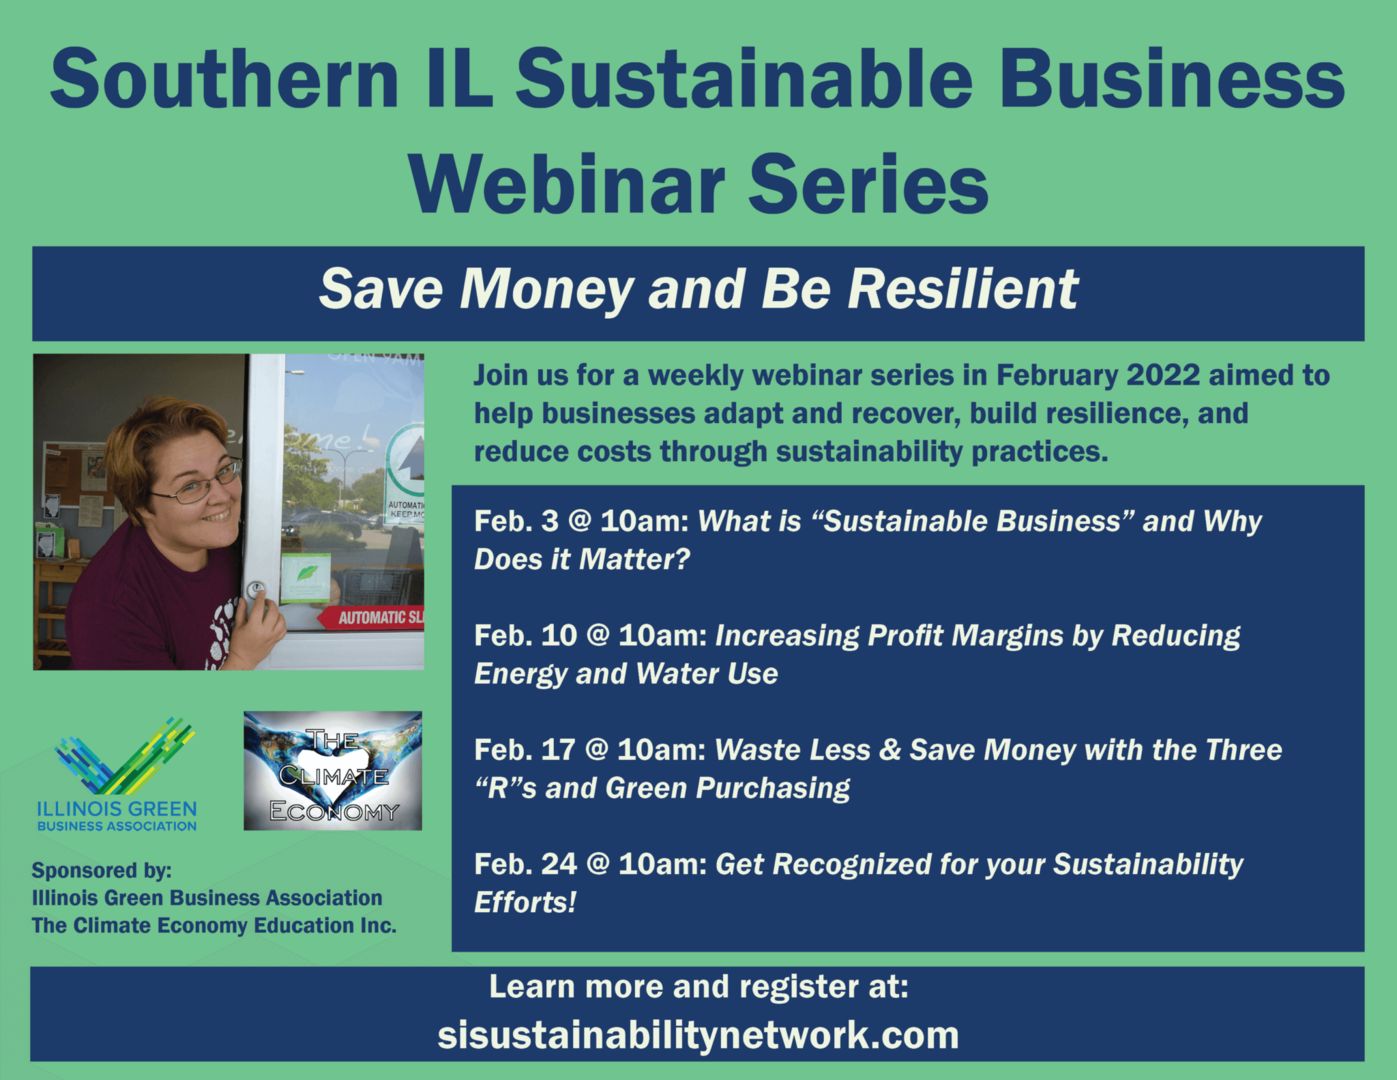 Save Money and Be Resilient Part 1 of 4 - Southern Illinois Sustainable Business Webinar Series, Online Event